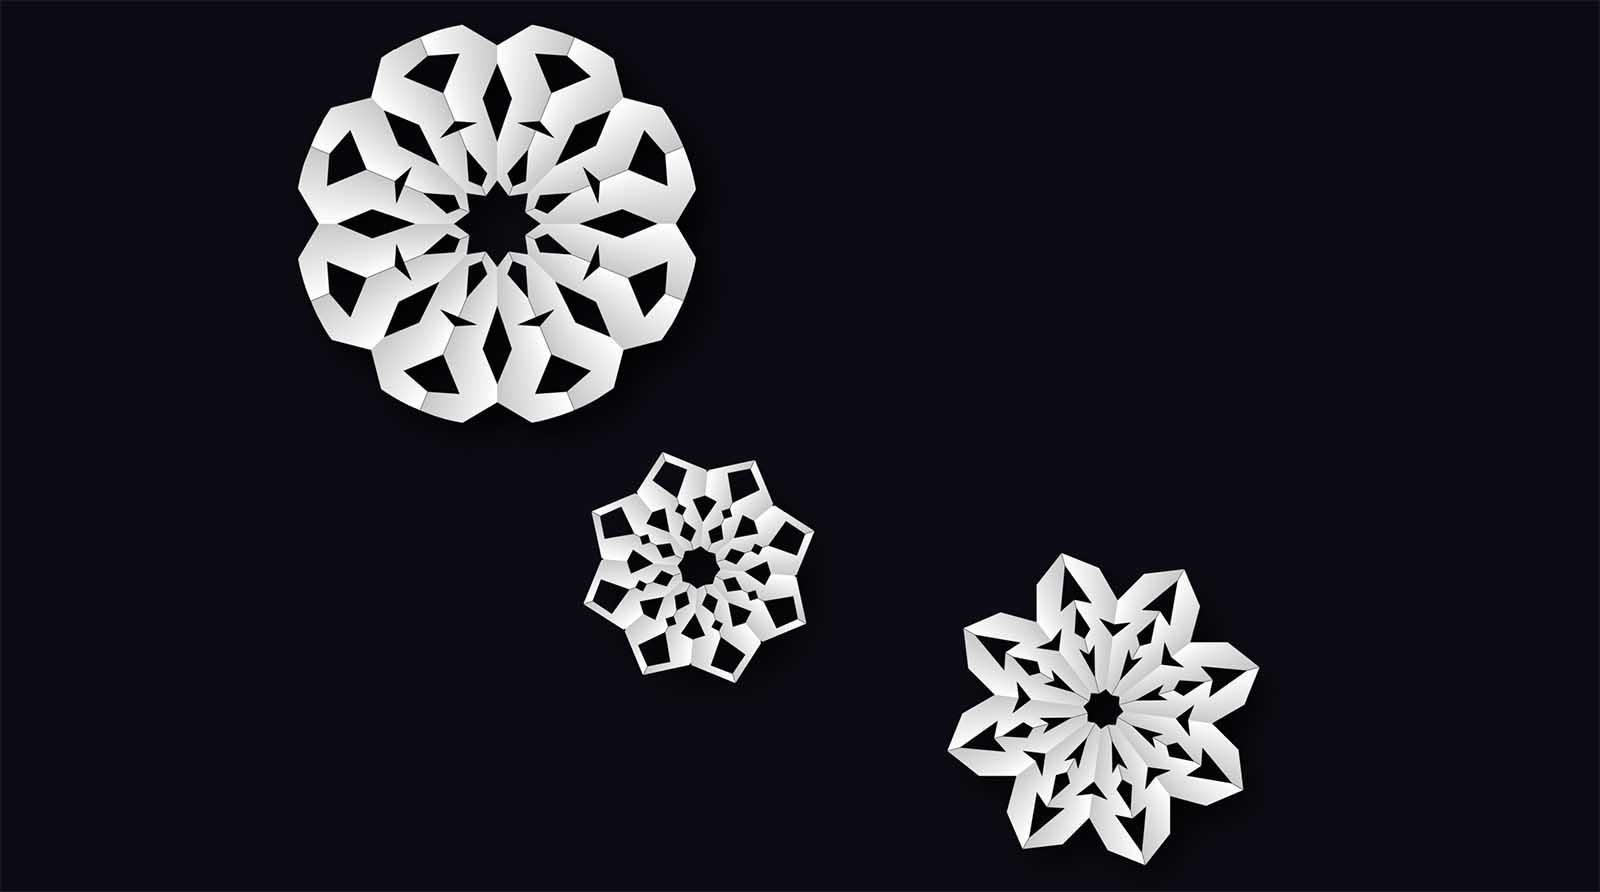 Screenshot of three CSS paper snowflakes on black background